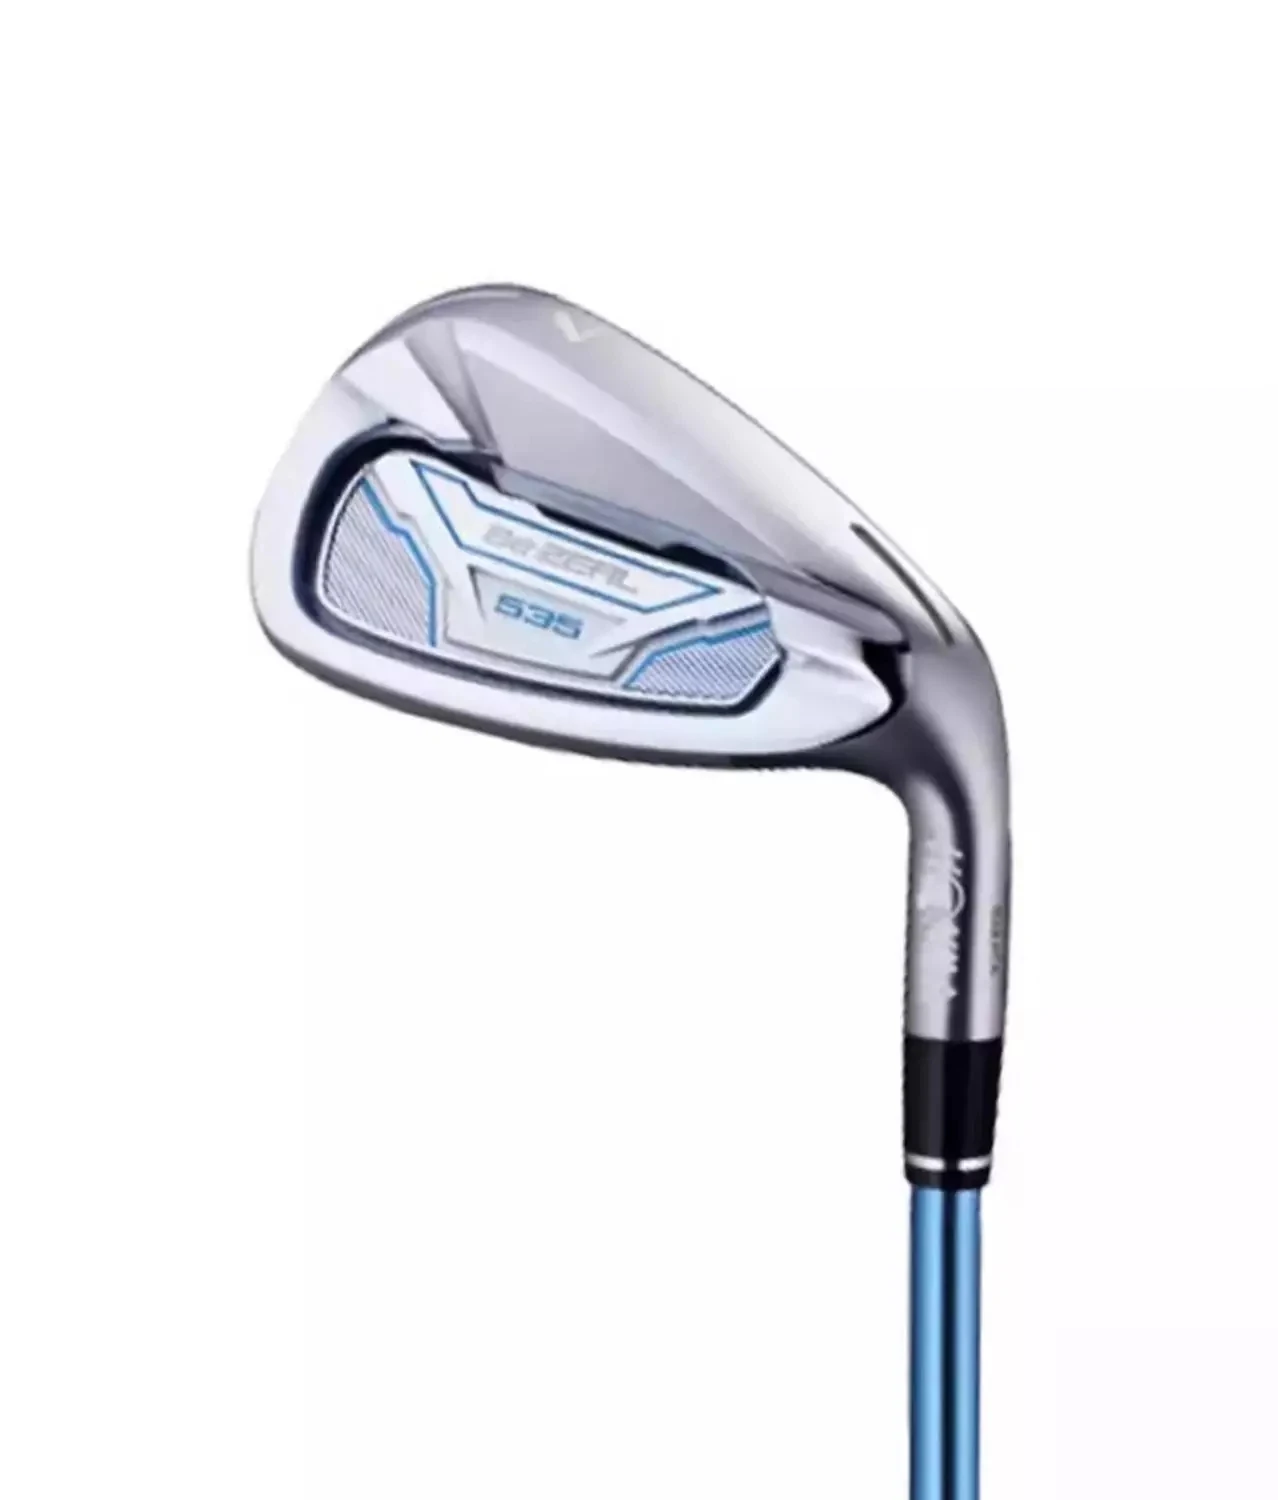 

HONMA Golf Club Ladies Complete Iron Set HONMA BEZEAL 535 is suitable for junior and intermediate scholars, golf clubs, with cap